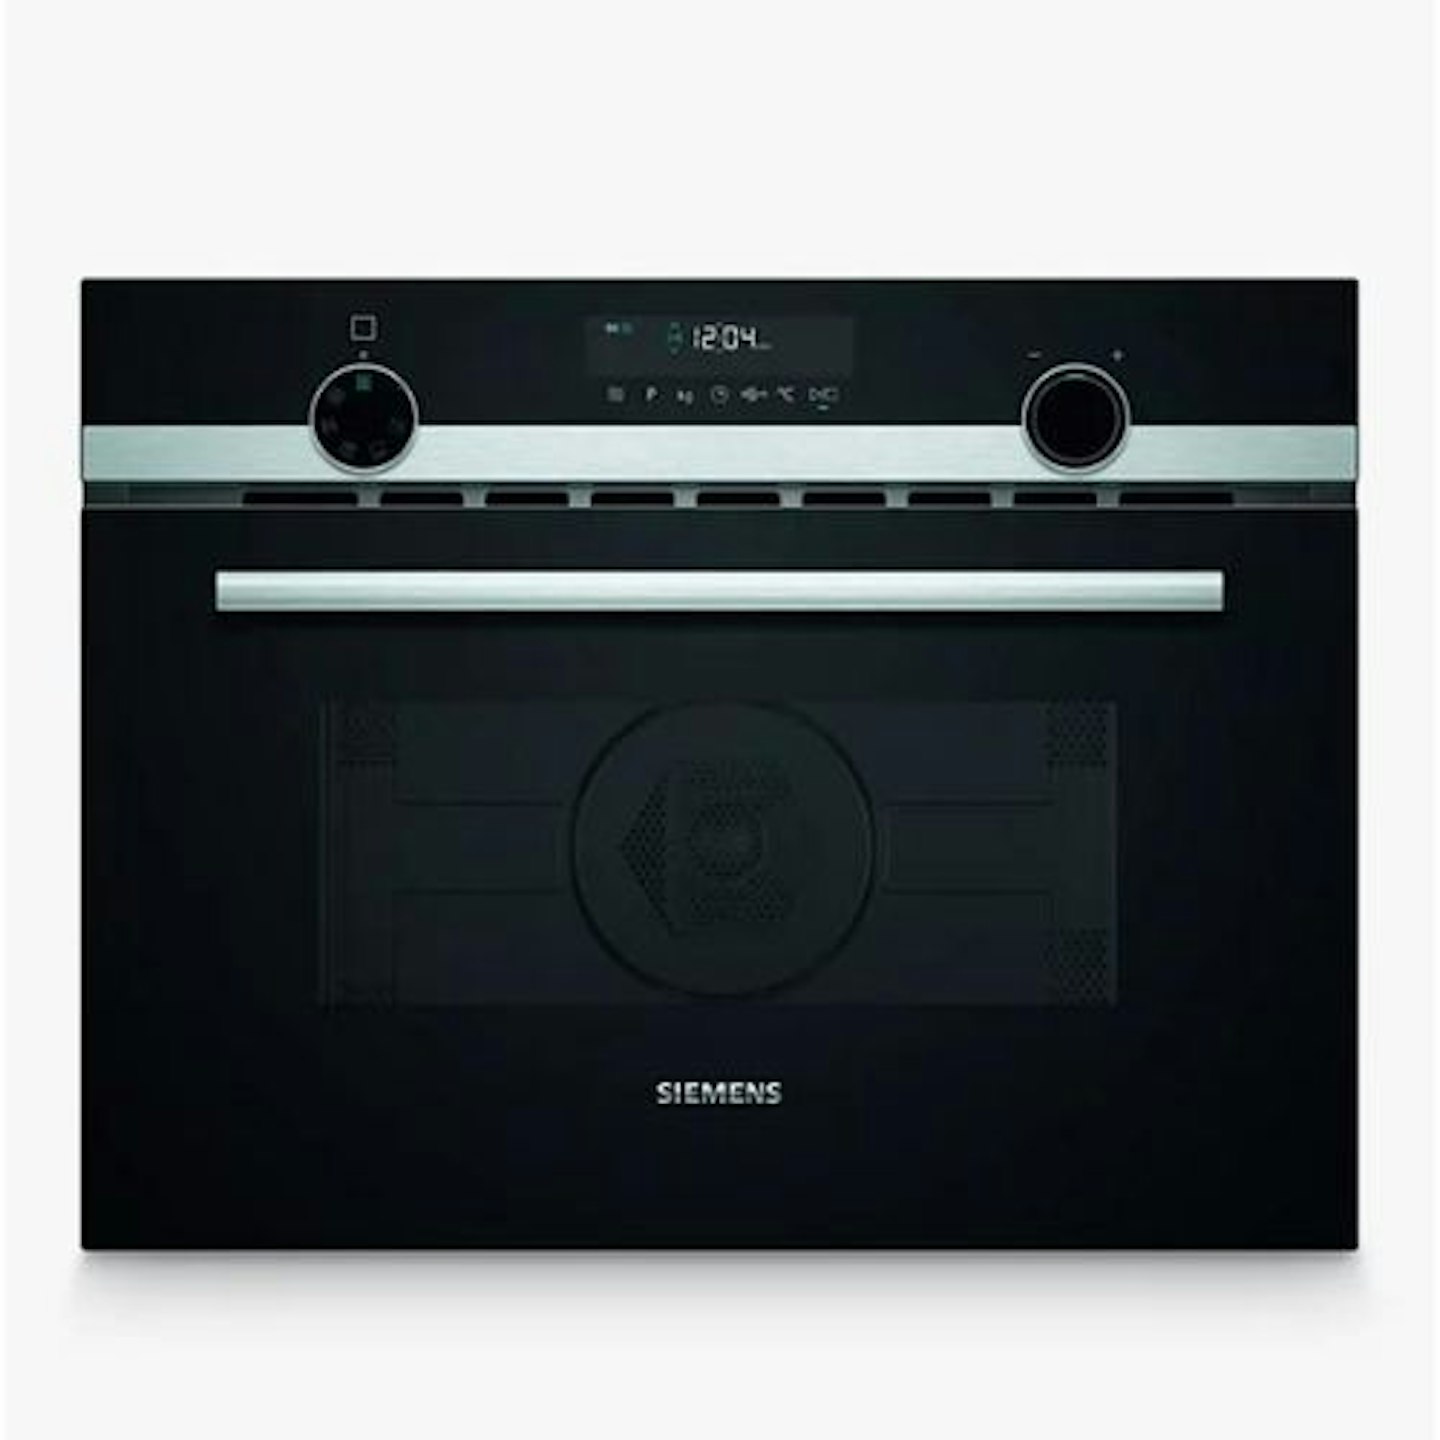 https://images.bauerhosting.com/affiliates/sites/10/2023/04/Siemens-CM585AGS0B-Built-In-Combination-Microwave-Oven-with-Grill-Stainless-Steel.jpg?auto=format&w=1440&q=80